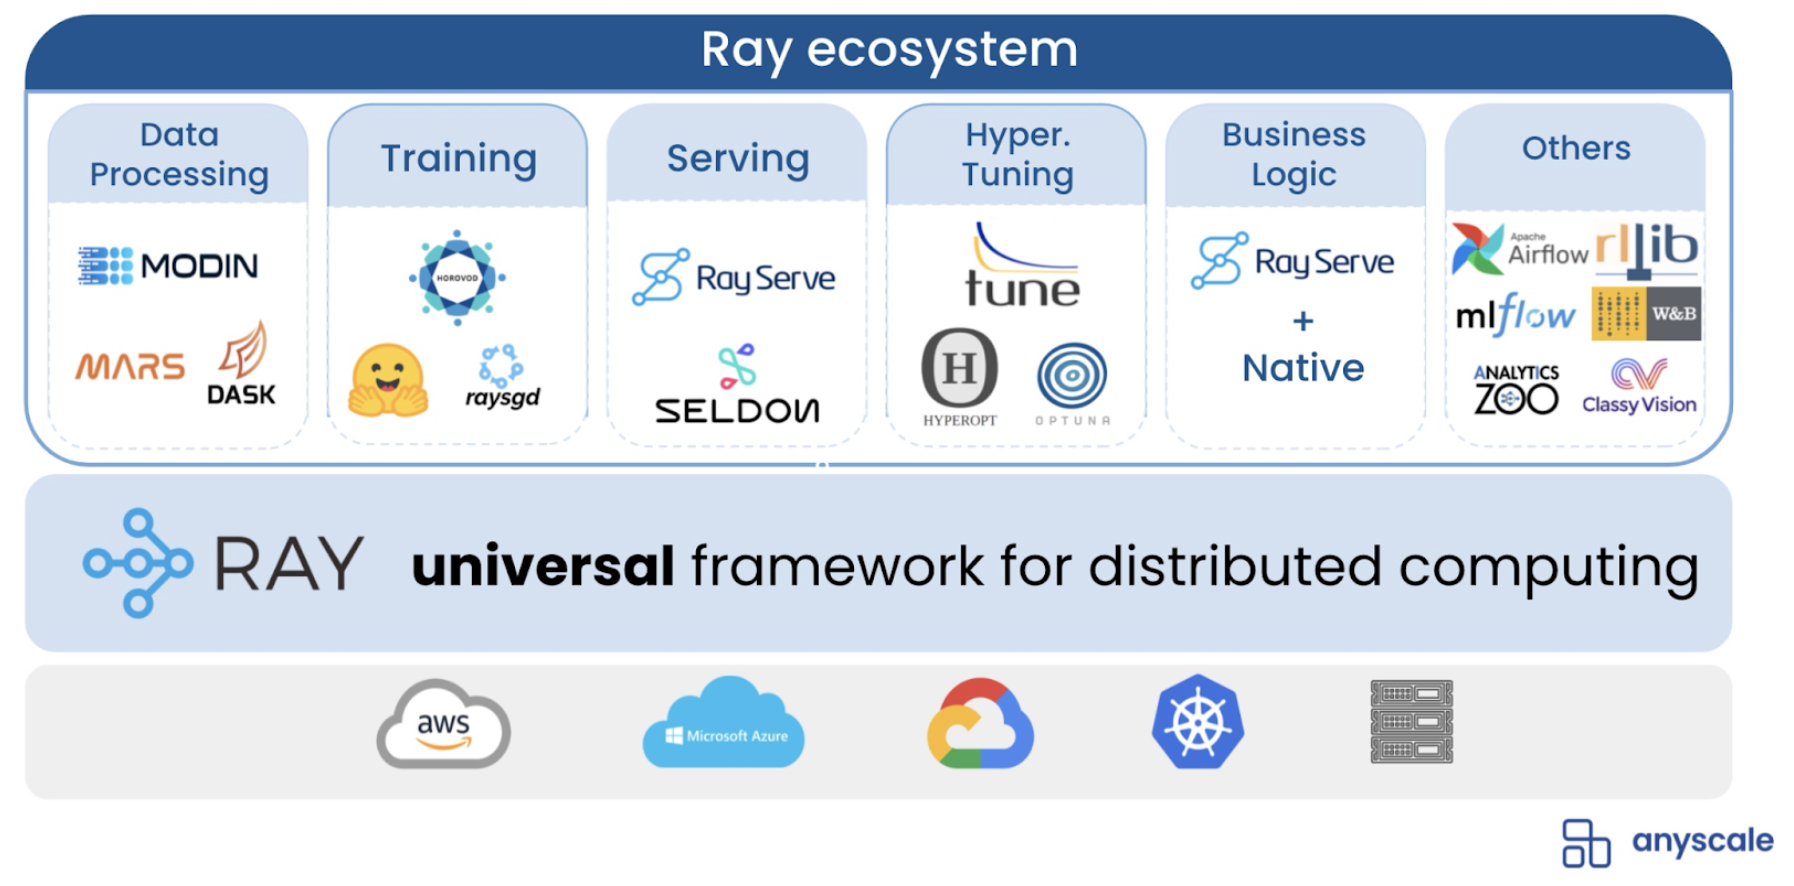 Ray Ecosystem, from Ion Stoica’s keynote at Ray Summit 2021